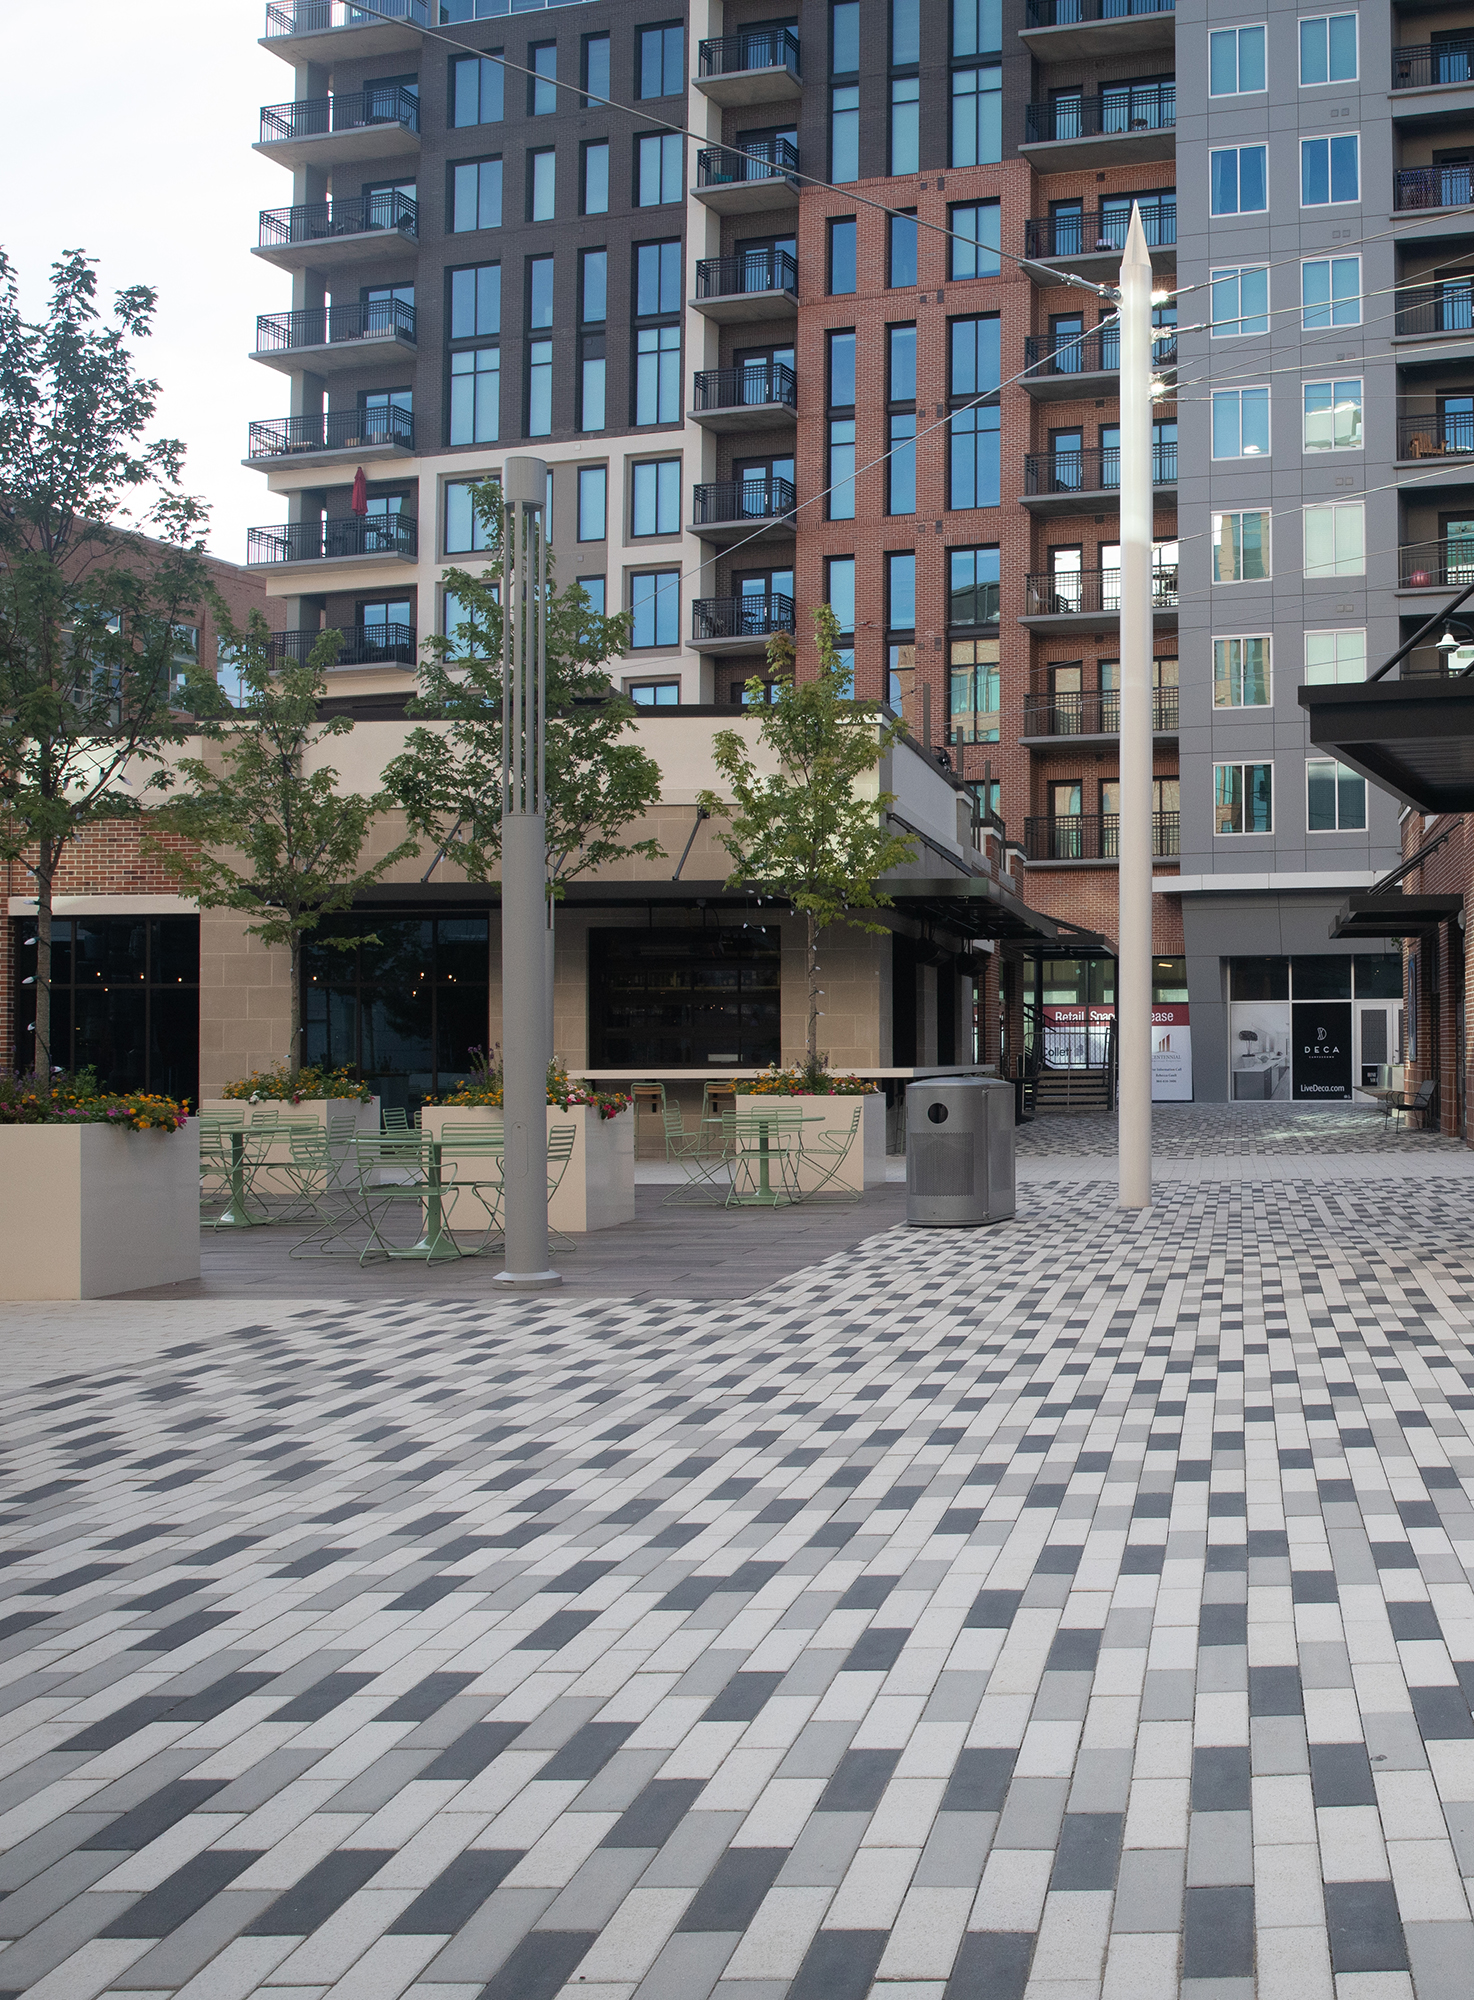 Promenade Plank pavers in a checkboard pattern guide visitors to the front entrance, as well as an outdoor eating space with large planters.